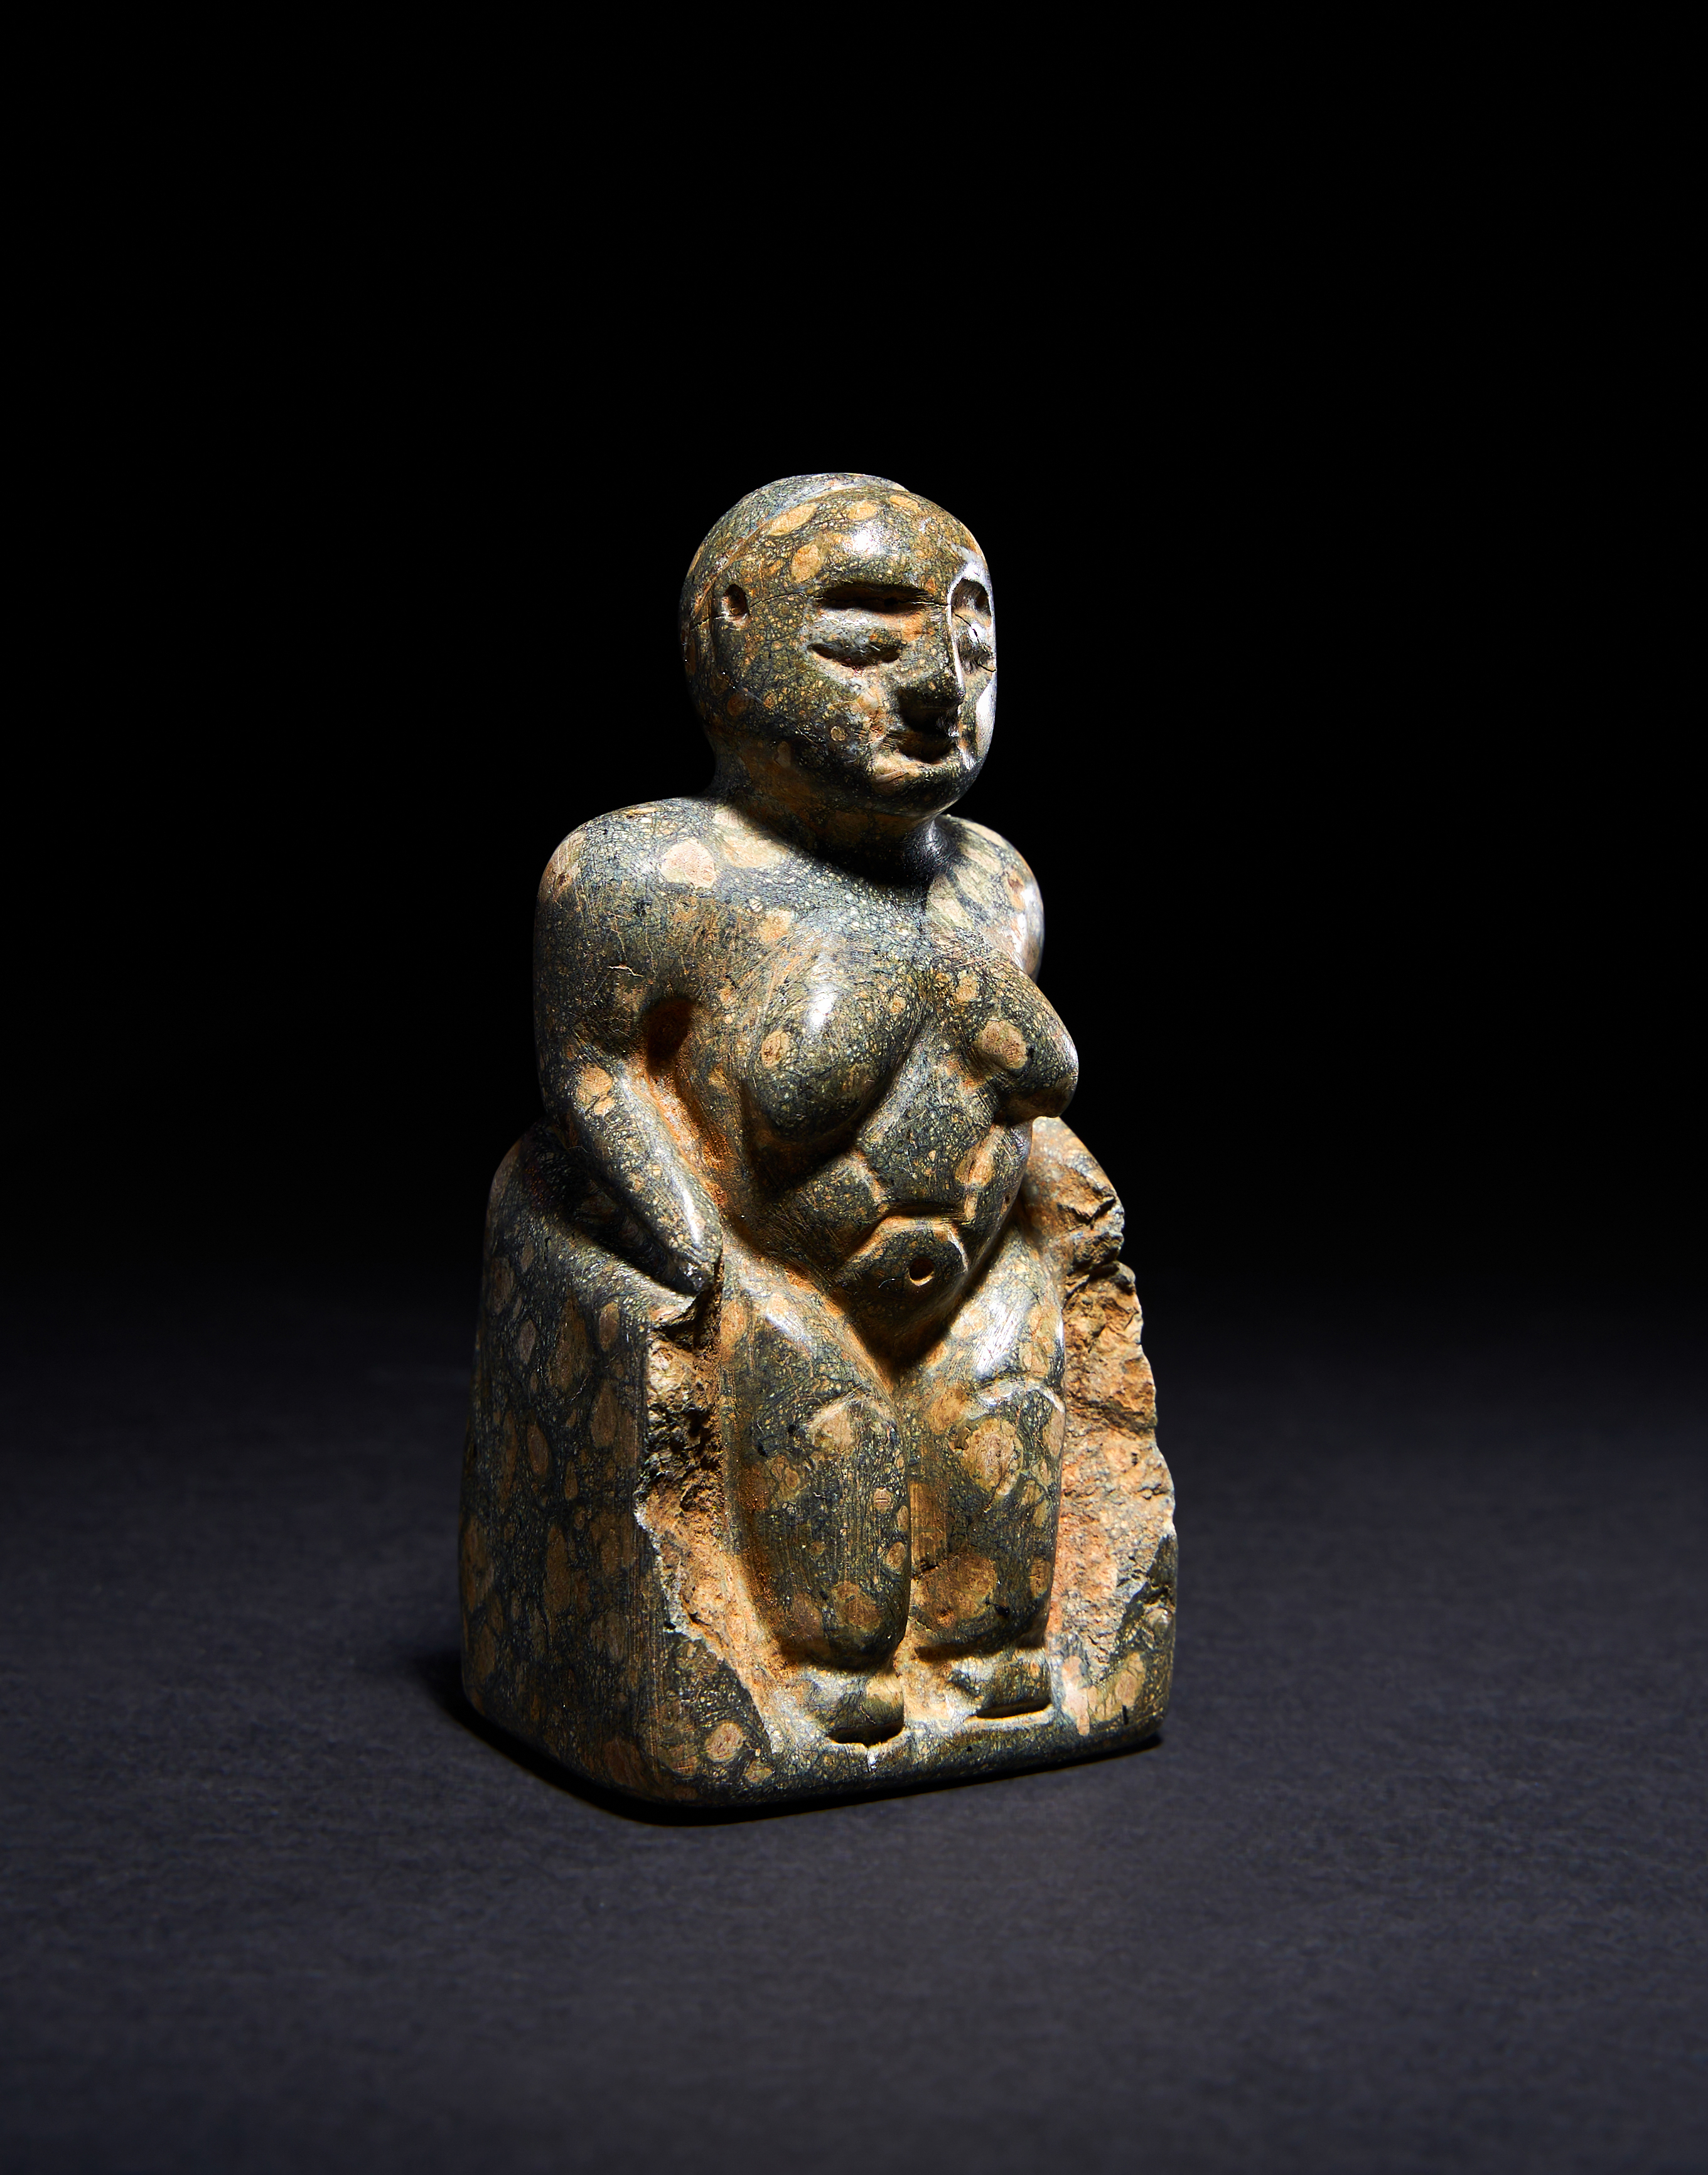 AN ANATOLIAN PATTERNED GREY STEATITE FIGURE OF A MOTHER GODDESS, NEOLITHIC PERIOD, CIRCA 6TH MILLENN